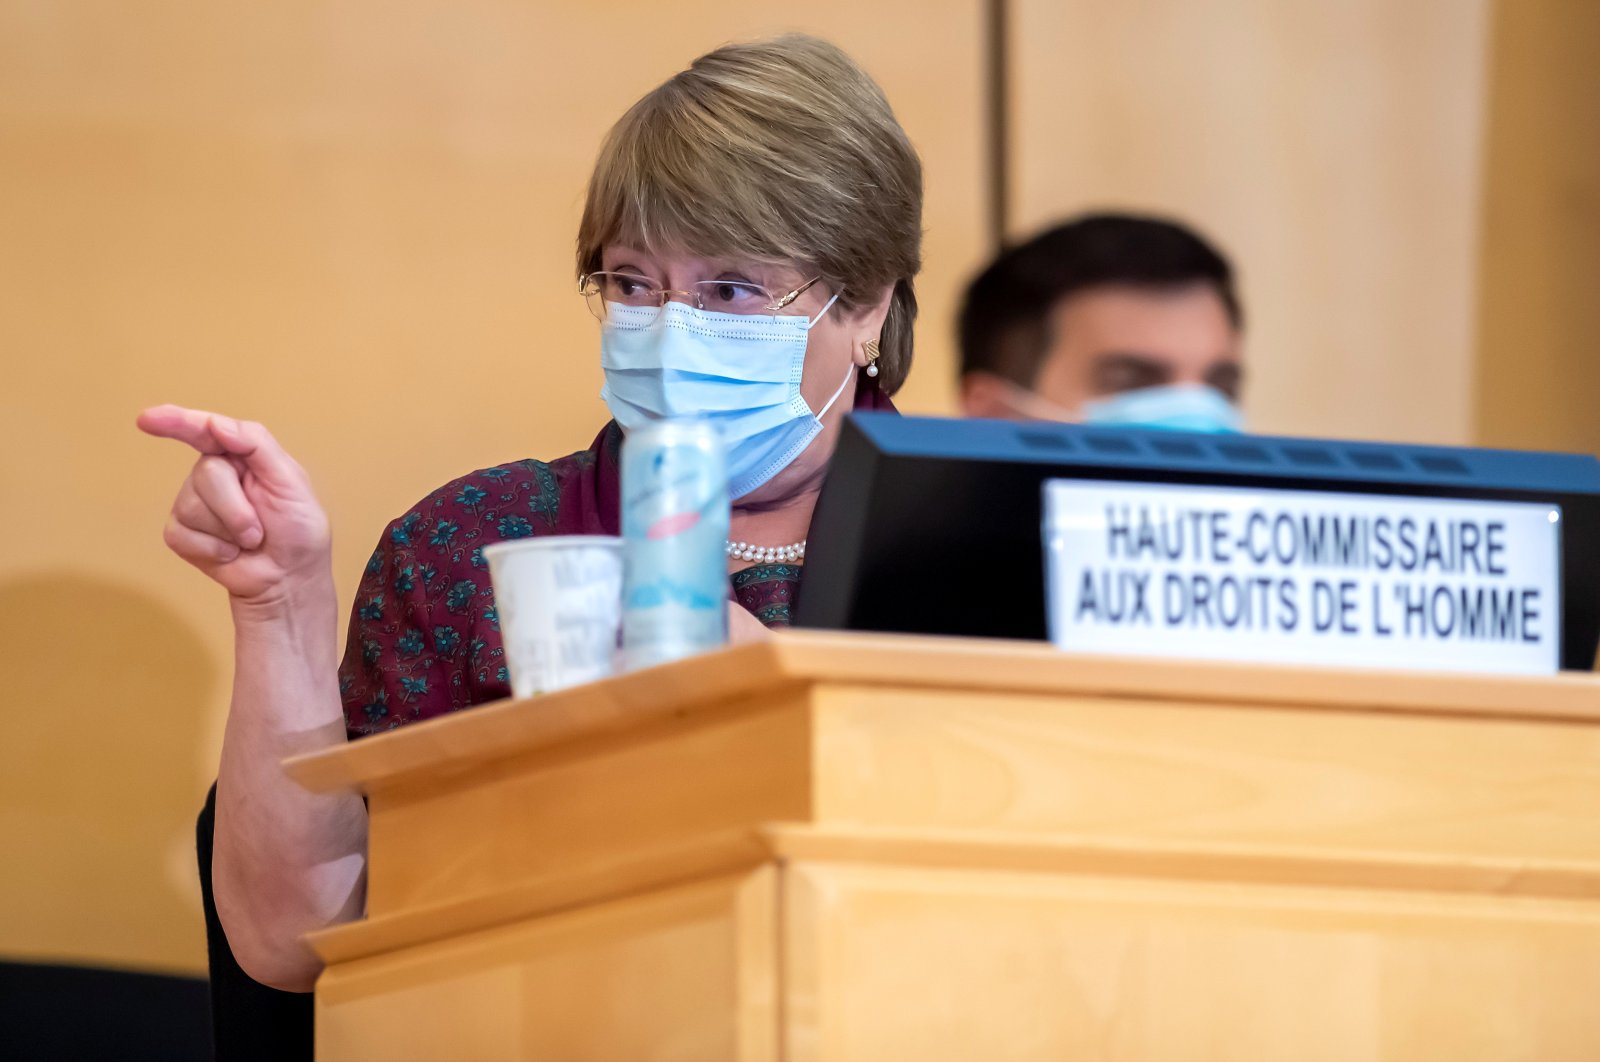 United Nations' High Commissioner for Human Rights Michelle Bachelet gestures during the opening of the 45th session of the Human Rights Council, at the European U.N. headquarters in Geneva, Switzerland, Sept. 14, 2020. (Reuters Photo)